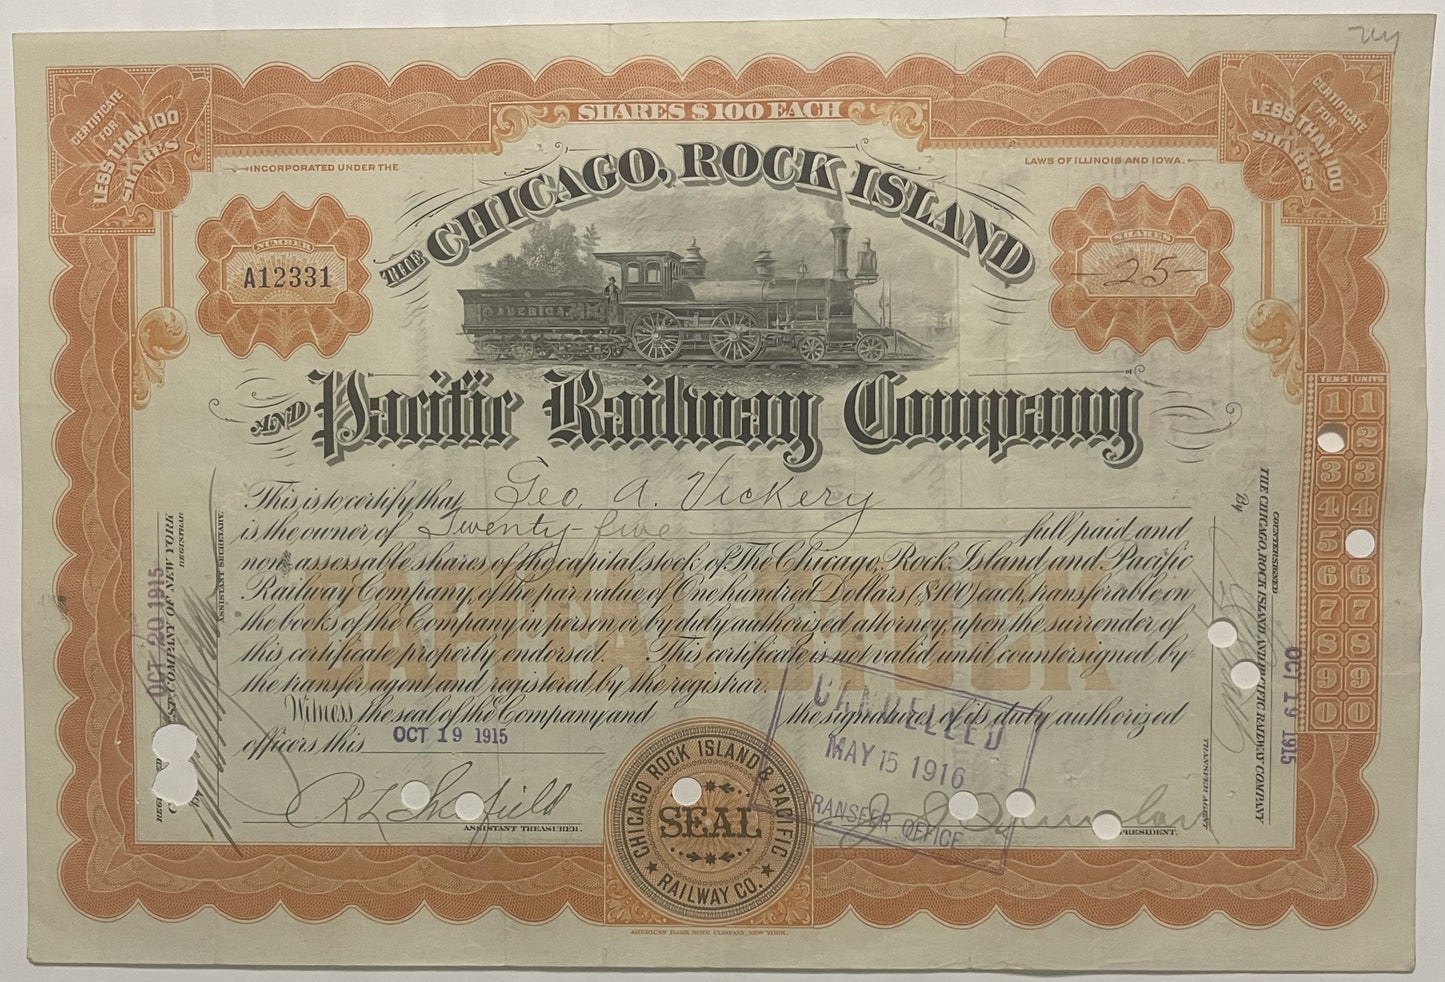 Antique 1915 Chicago Rock Island Pacific Railroad Stock Certificate Collectibles Vintage and Bond Certificates